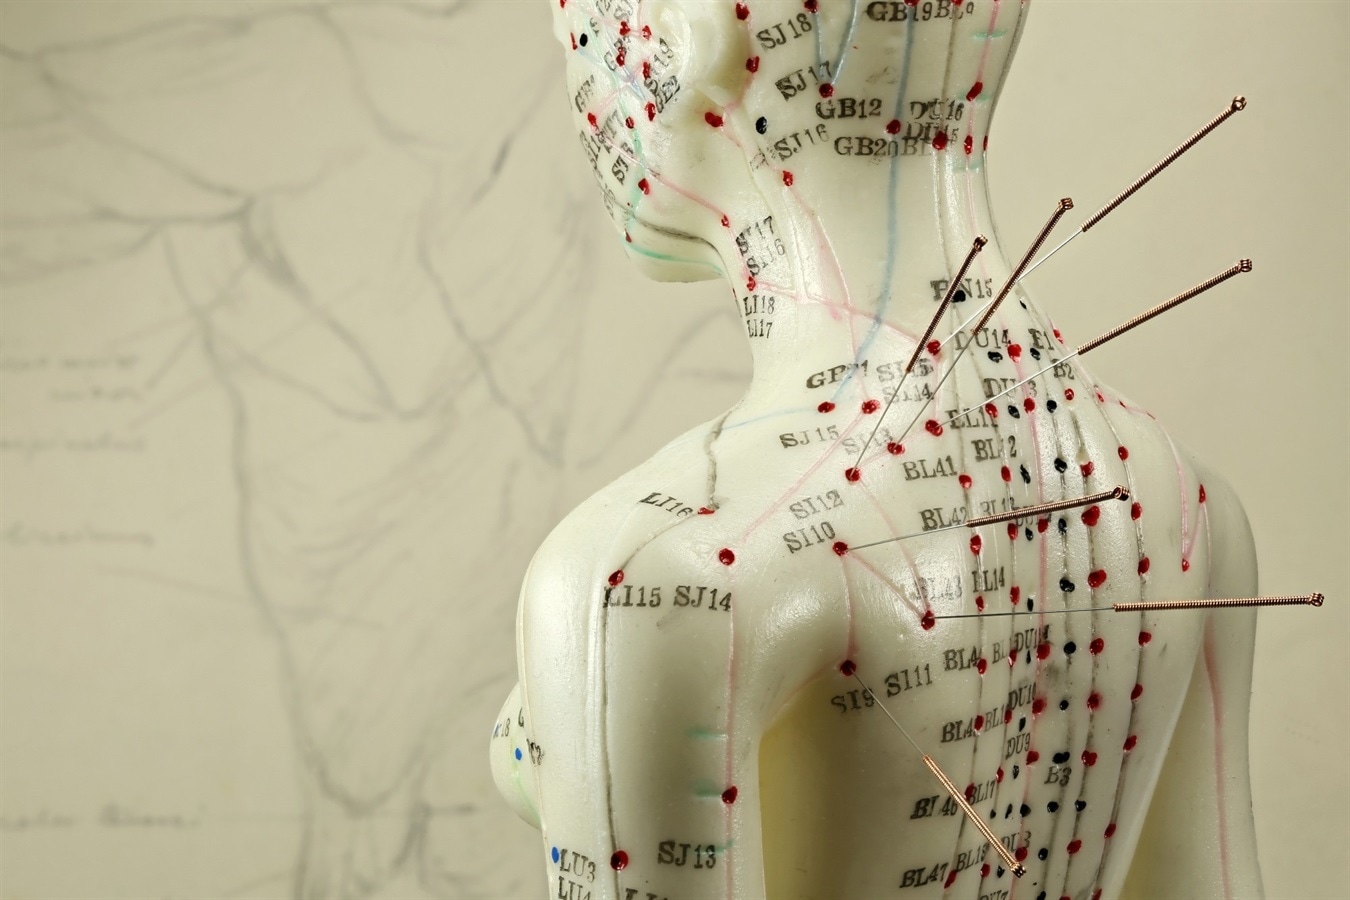 Study reveals acupuncture and massage as effective pain management in advanced cancer